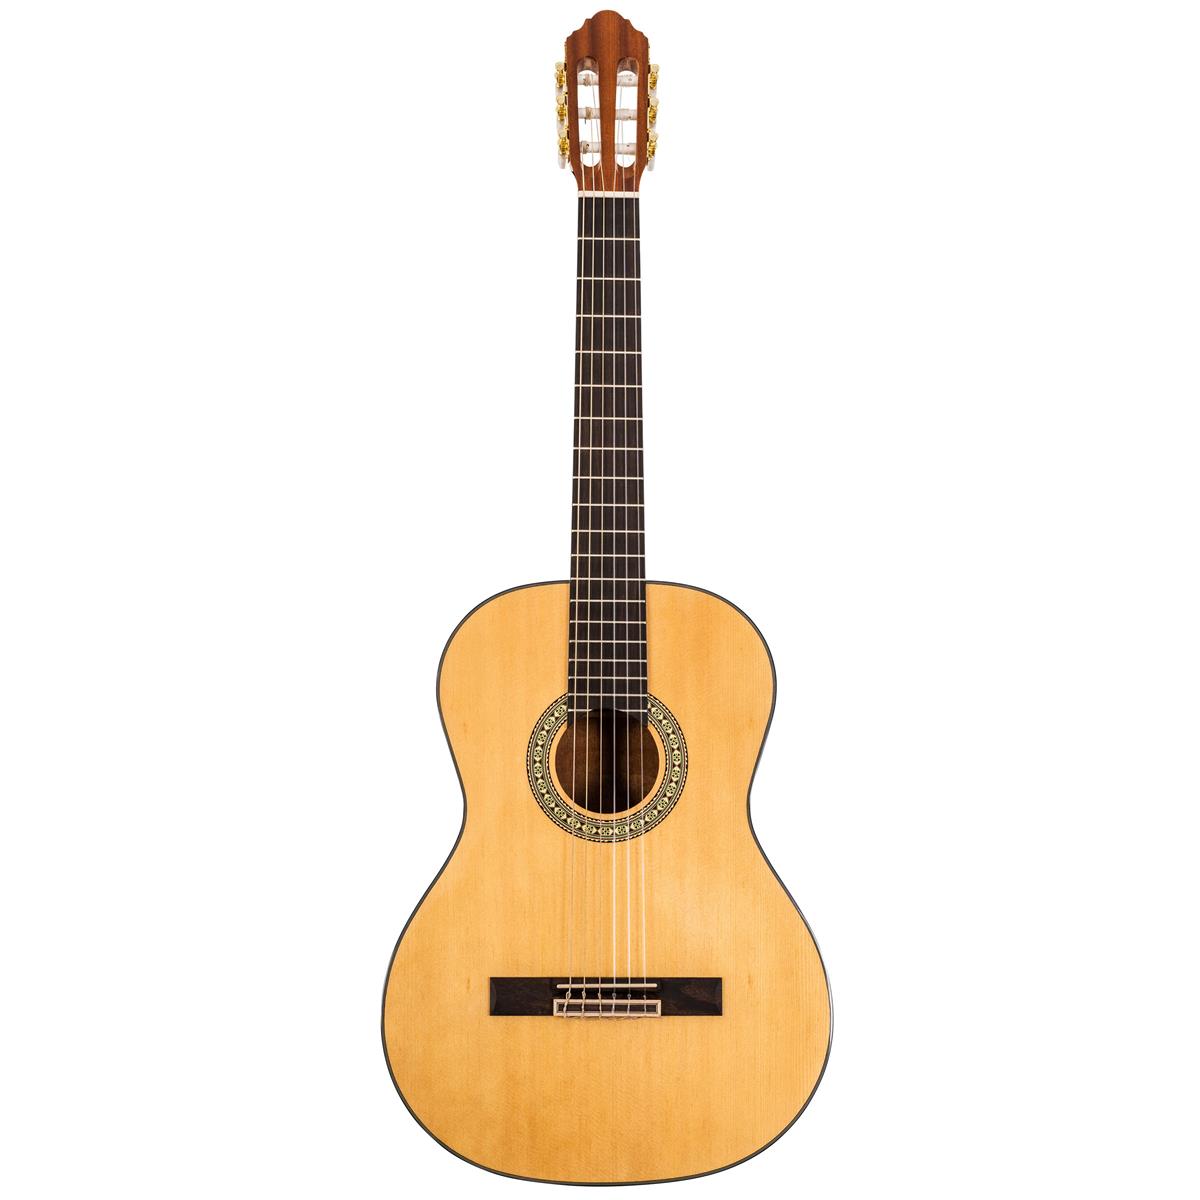 Image of Peavey Delta Woods CNS-1 Classical Nylon String Acoustic Guitar